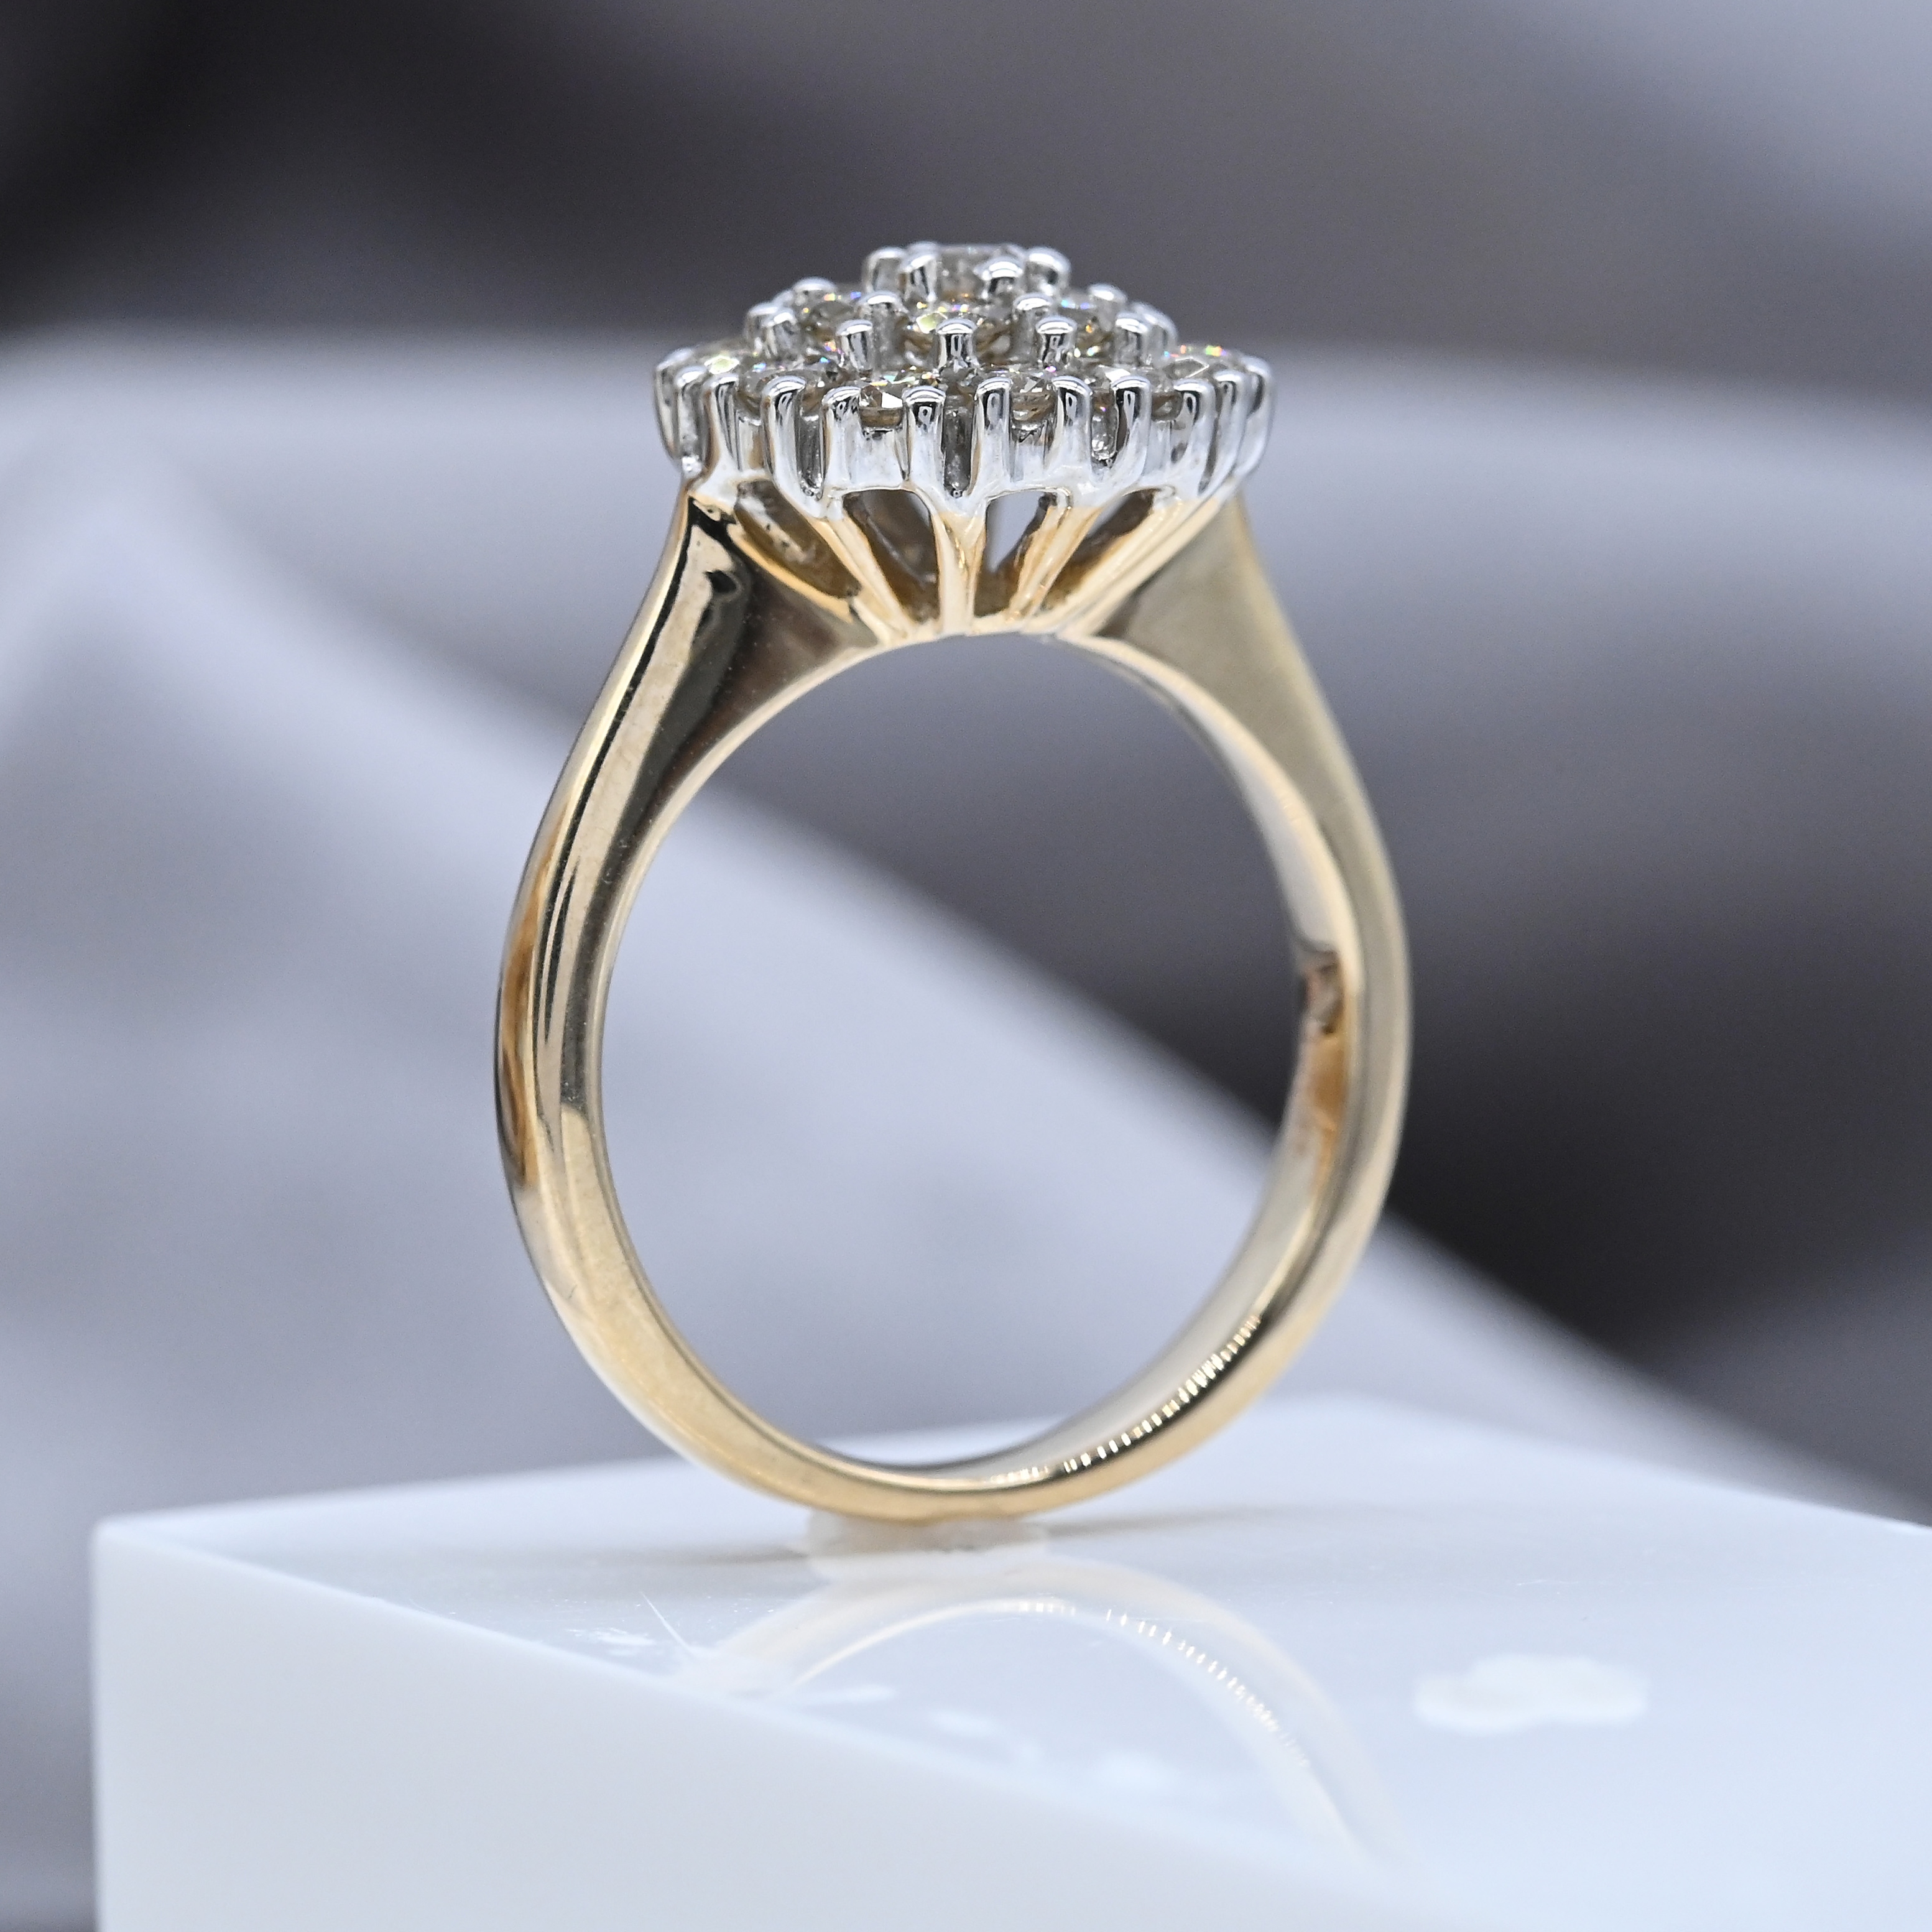 1.03 Carat Diamond Layered Cluster Ring In Yellow Gold - Image 4 of 7